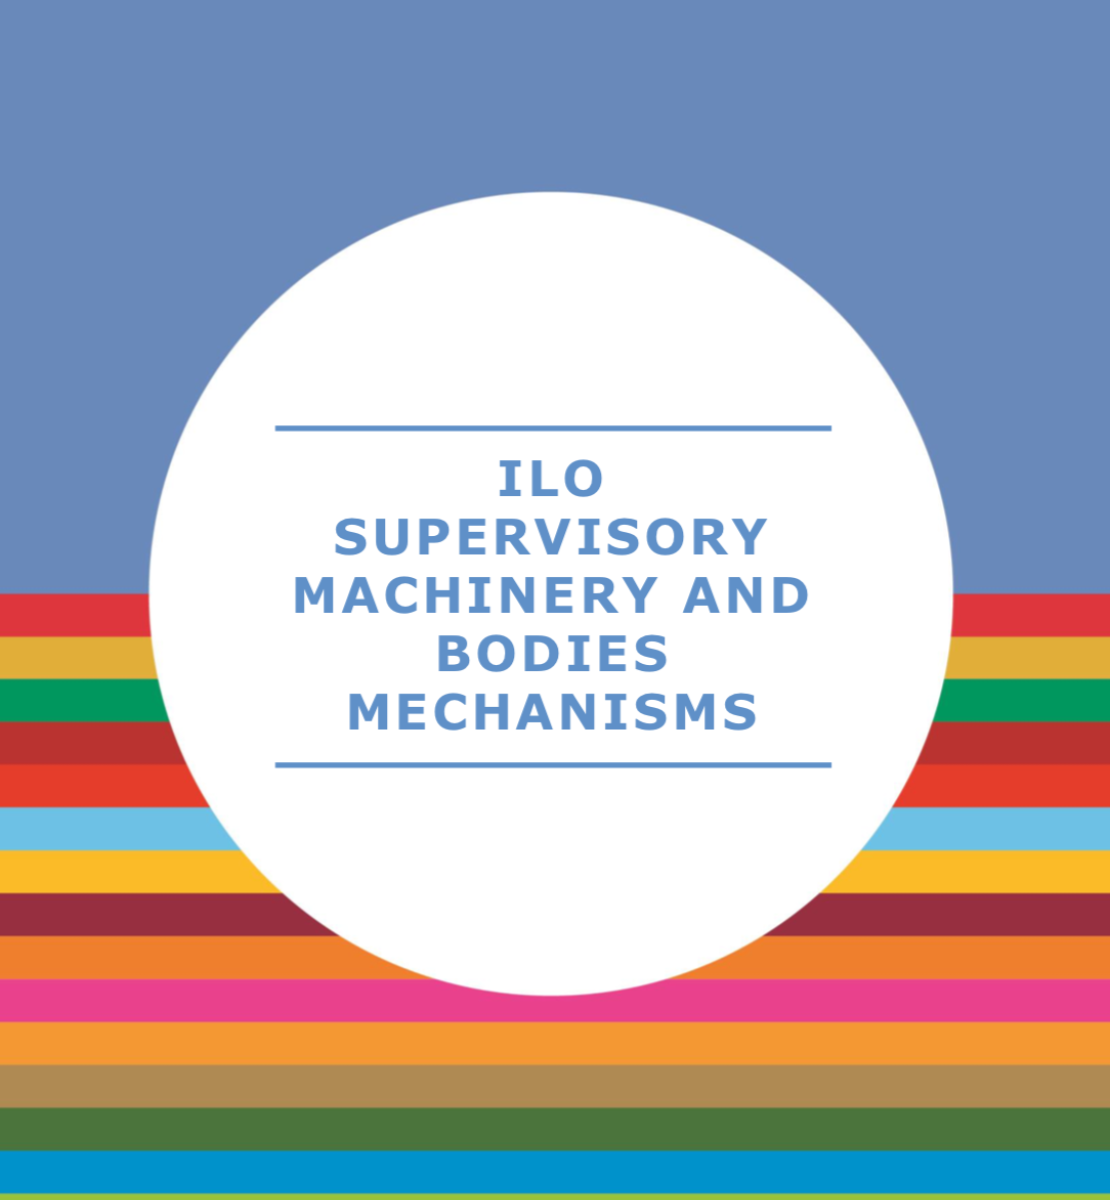  Cover shows the title, "ILO Supervisory Machinery and Bodies Mechanisms" in the centre of a solid circle in front of a solid and striped background.